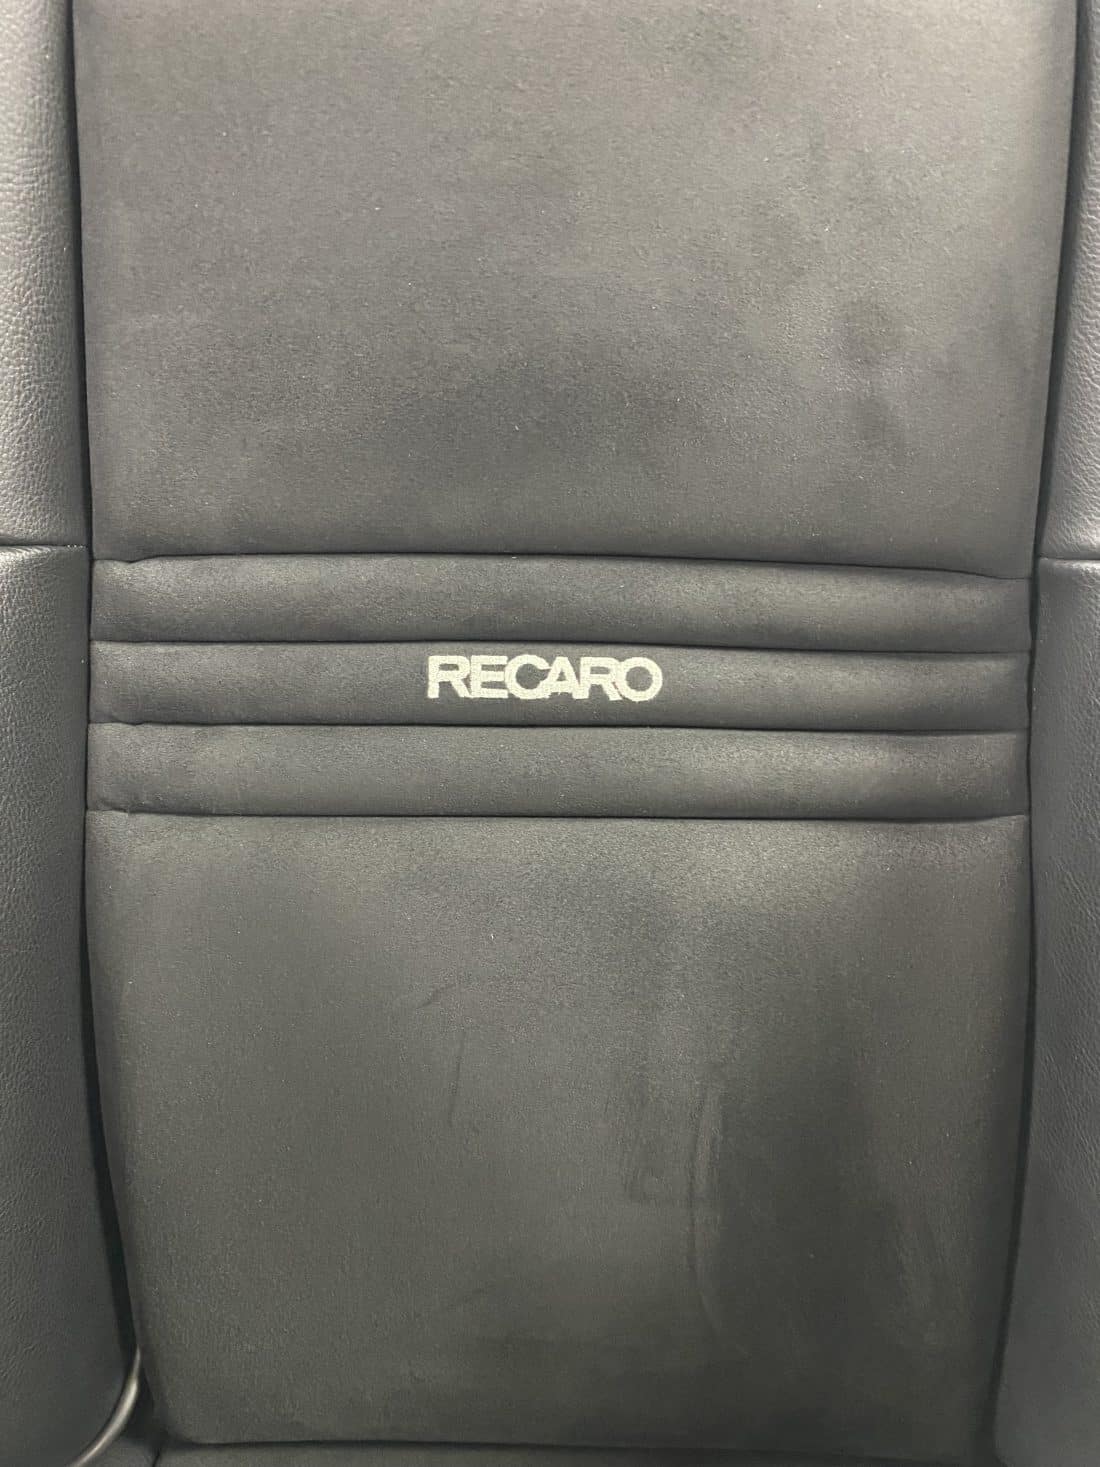 Trp Post Container Data Trp Post Id 12978 Recaro Expert L Dinamica Faux Leather Refurbished Trp Post Container